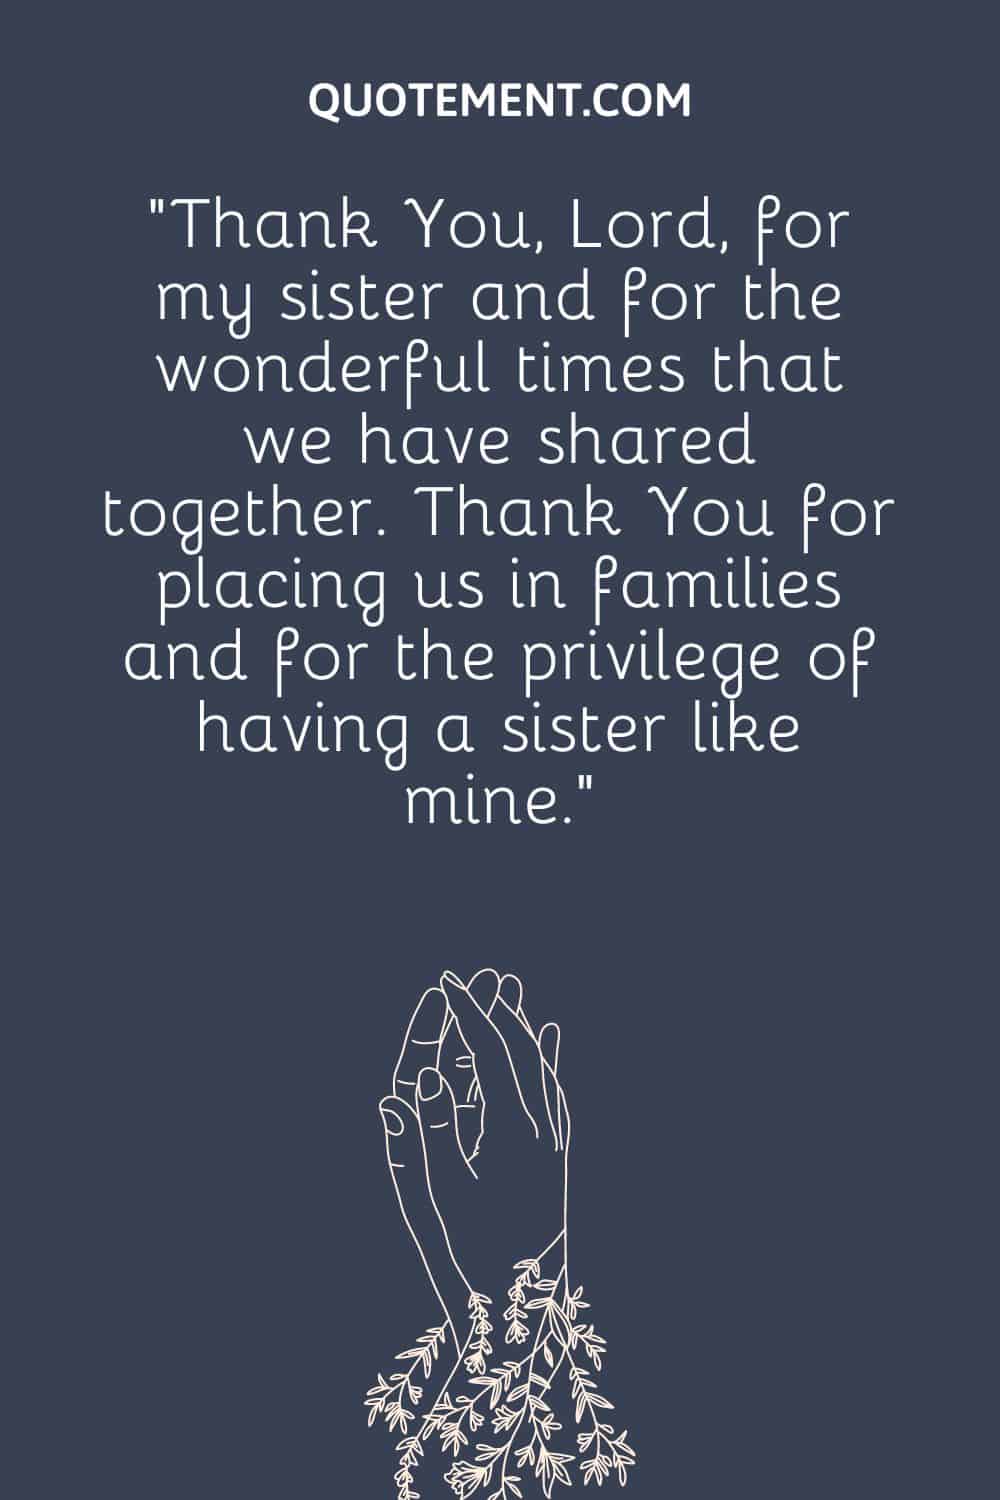 “Thank You, Lord, for my sister and for the wonderful times that we have shared together. Thank You for placing us in families and for the privilege of having a sister like mine.”